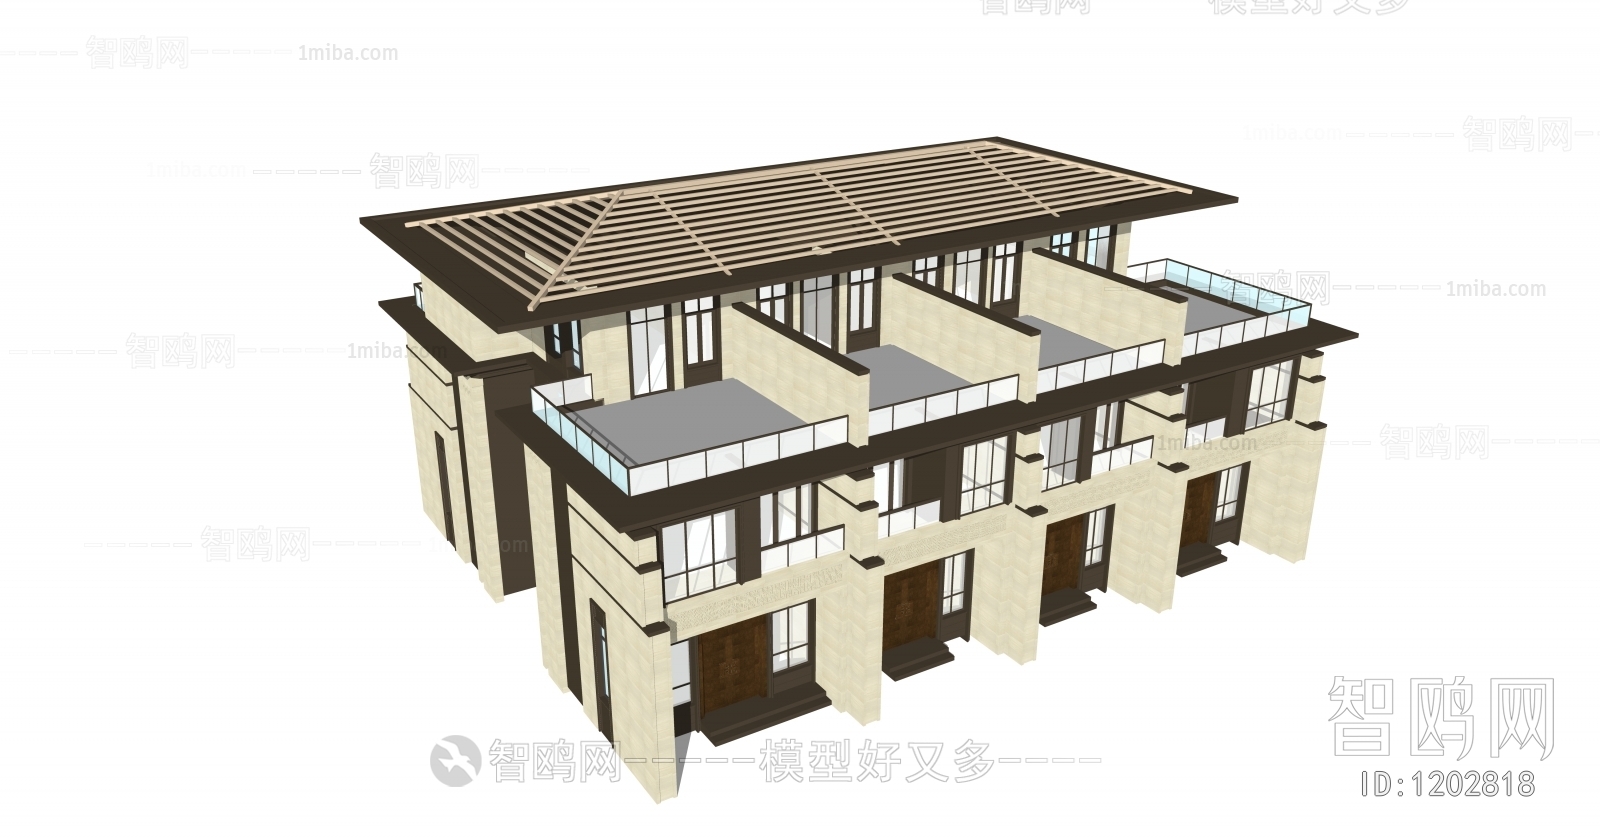 New Chinese Style Villa Appearance